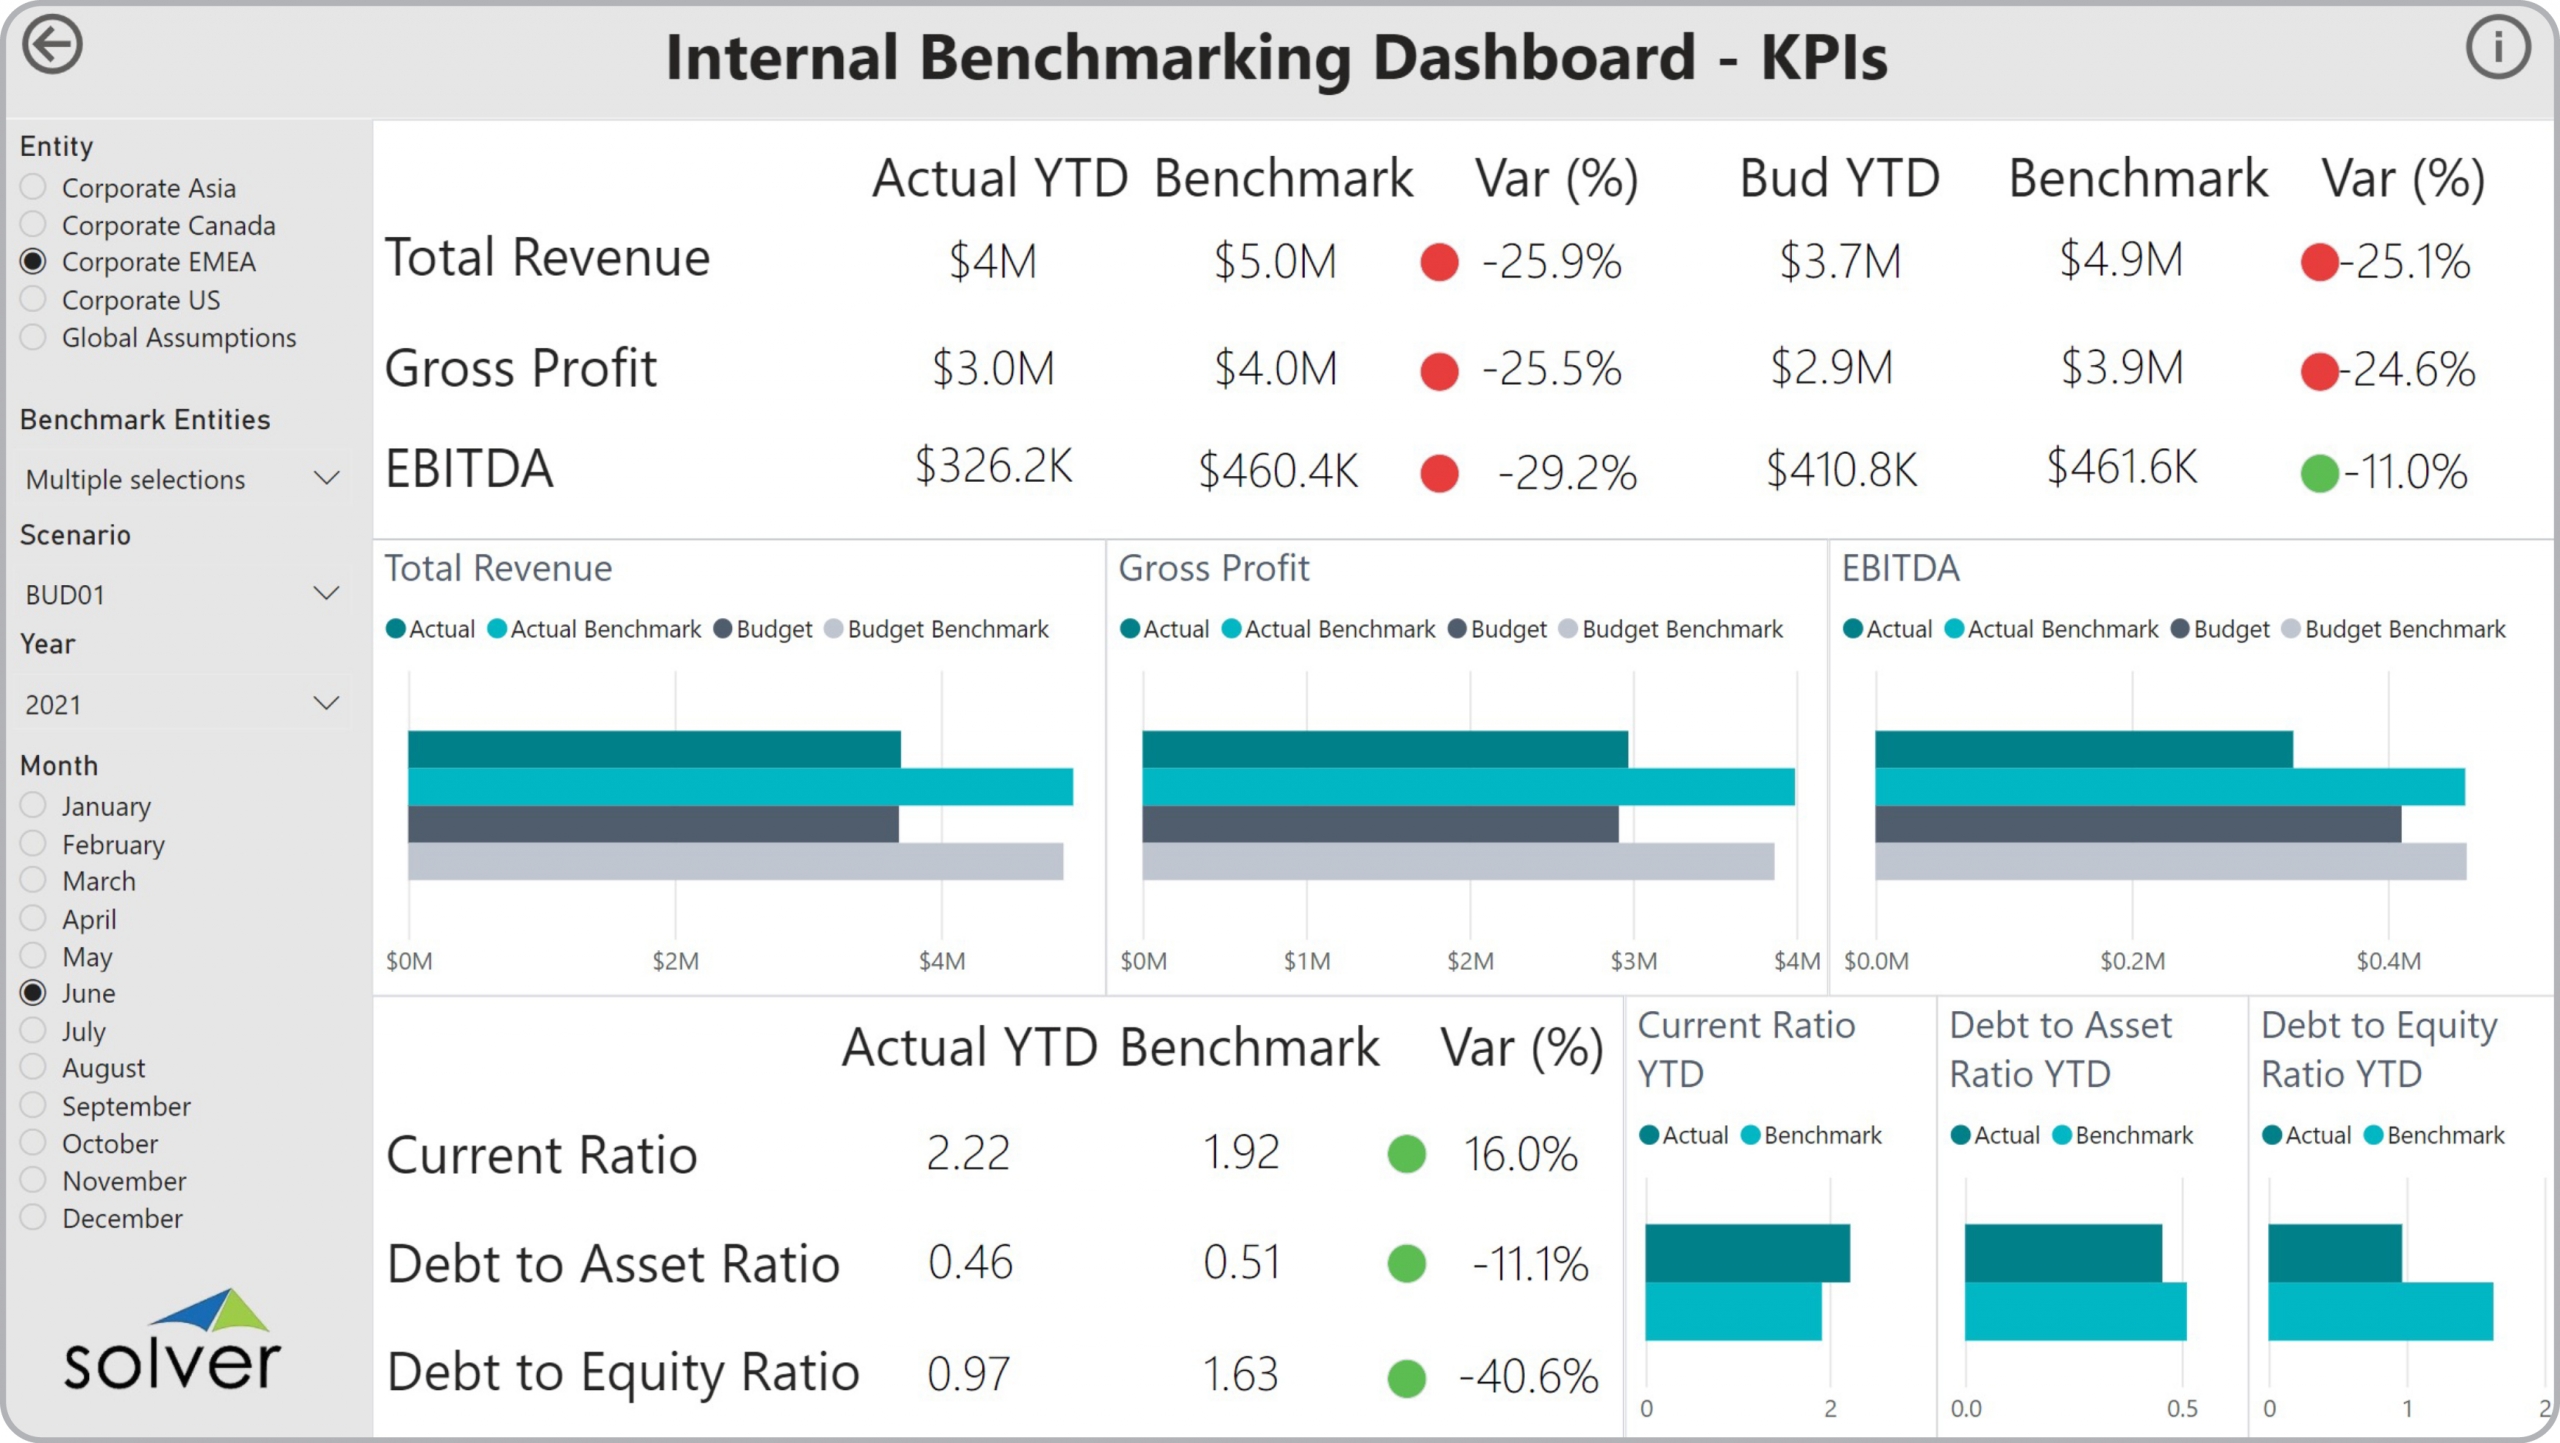 Example of a KPI Benchmarking Dashboard to Streamline the Monthly Reporting Process